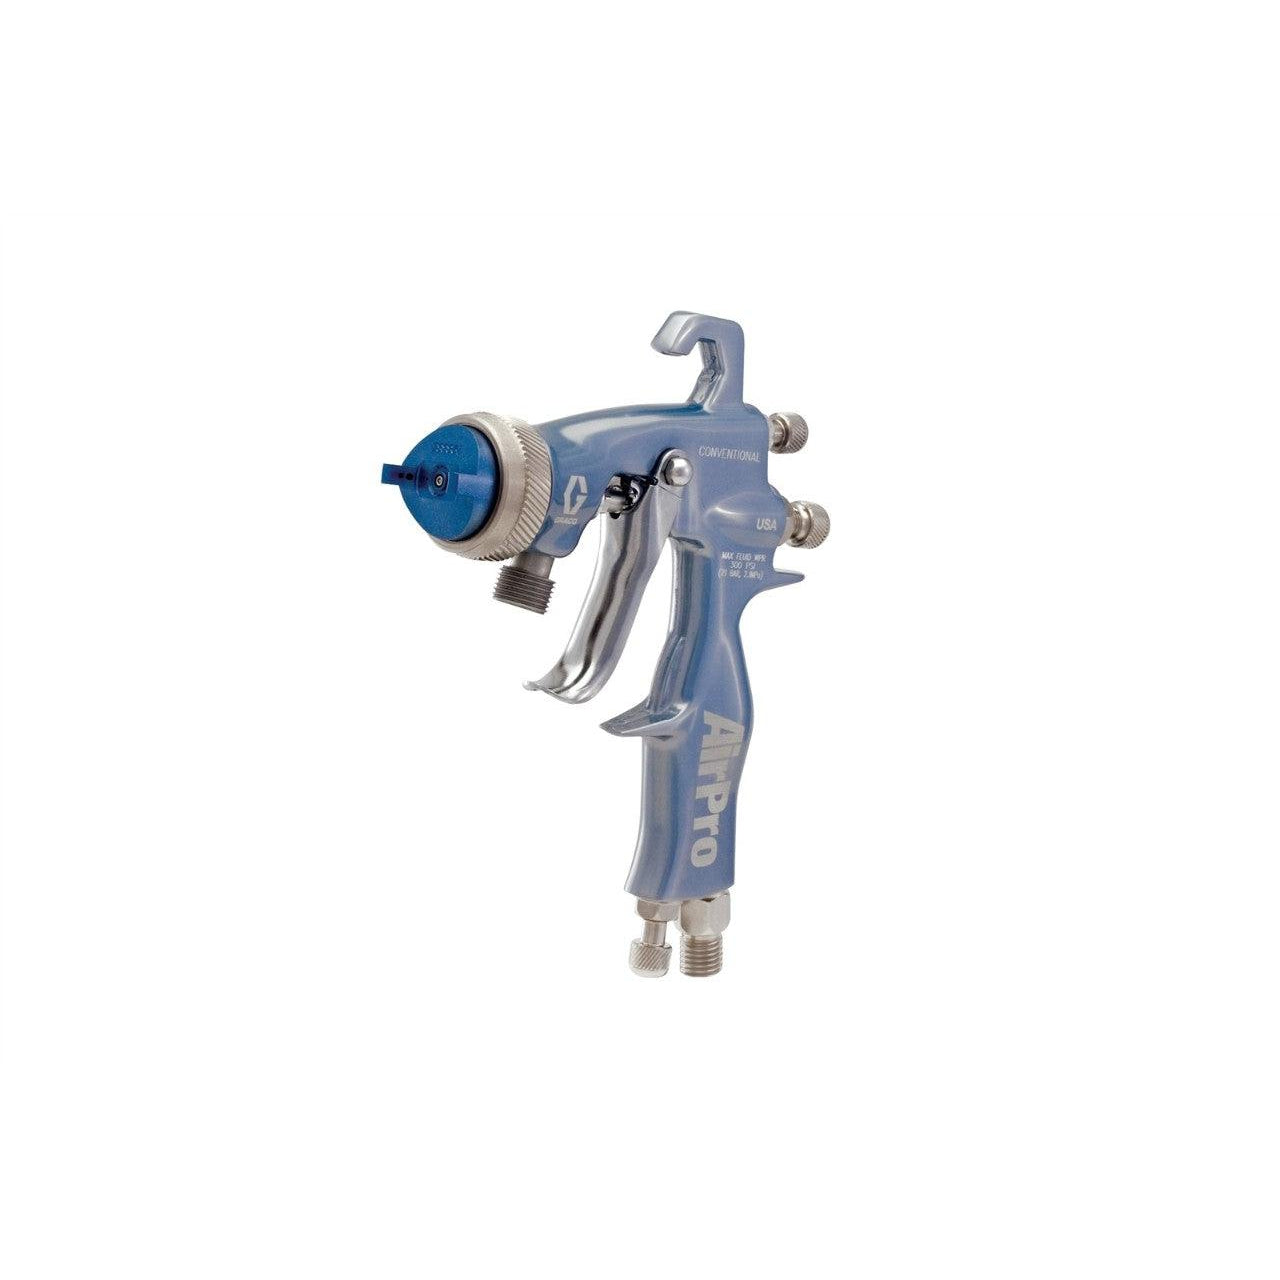 AirPro Air Spray Pressure Feed Gun, Conventional, 0.030 inch (0.8 mm) Nozzle, for Waterborne Applications